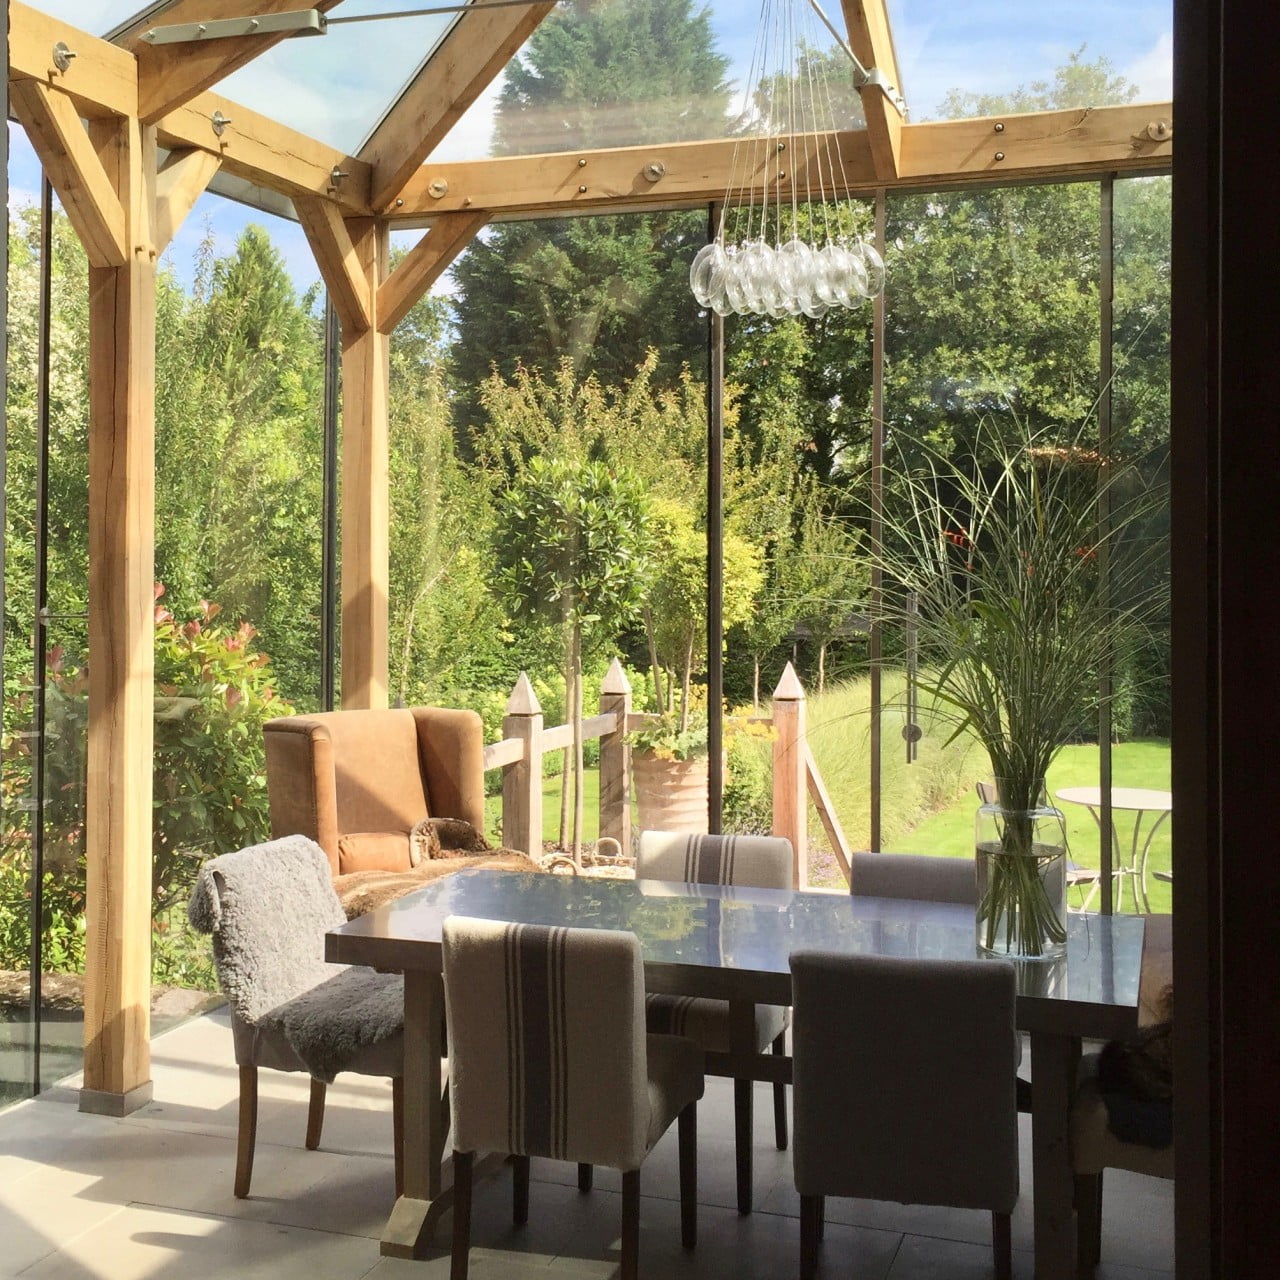 This is our own house & garden seeing through our contemporary oak framed dining room.